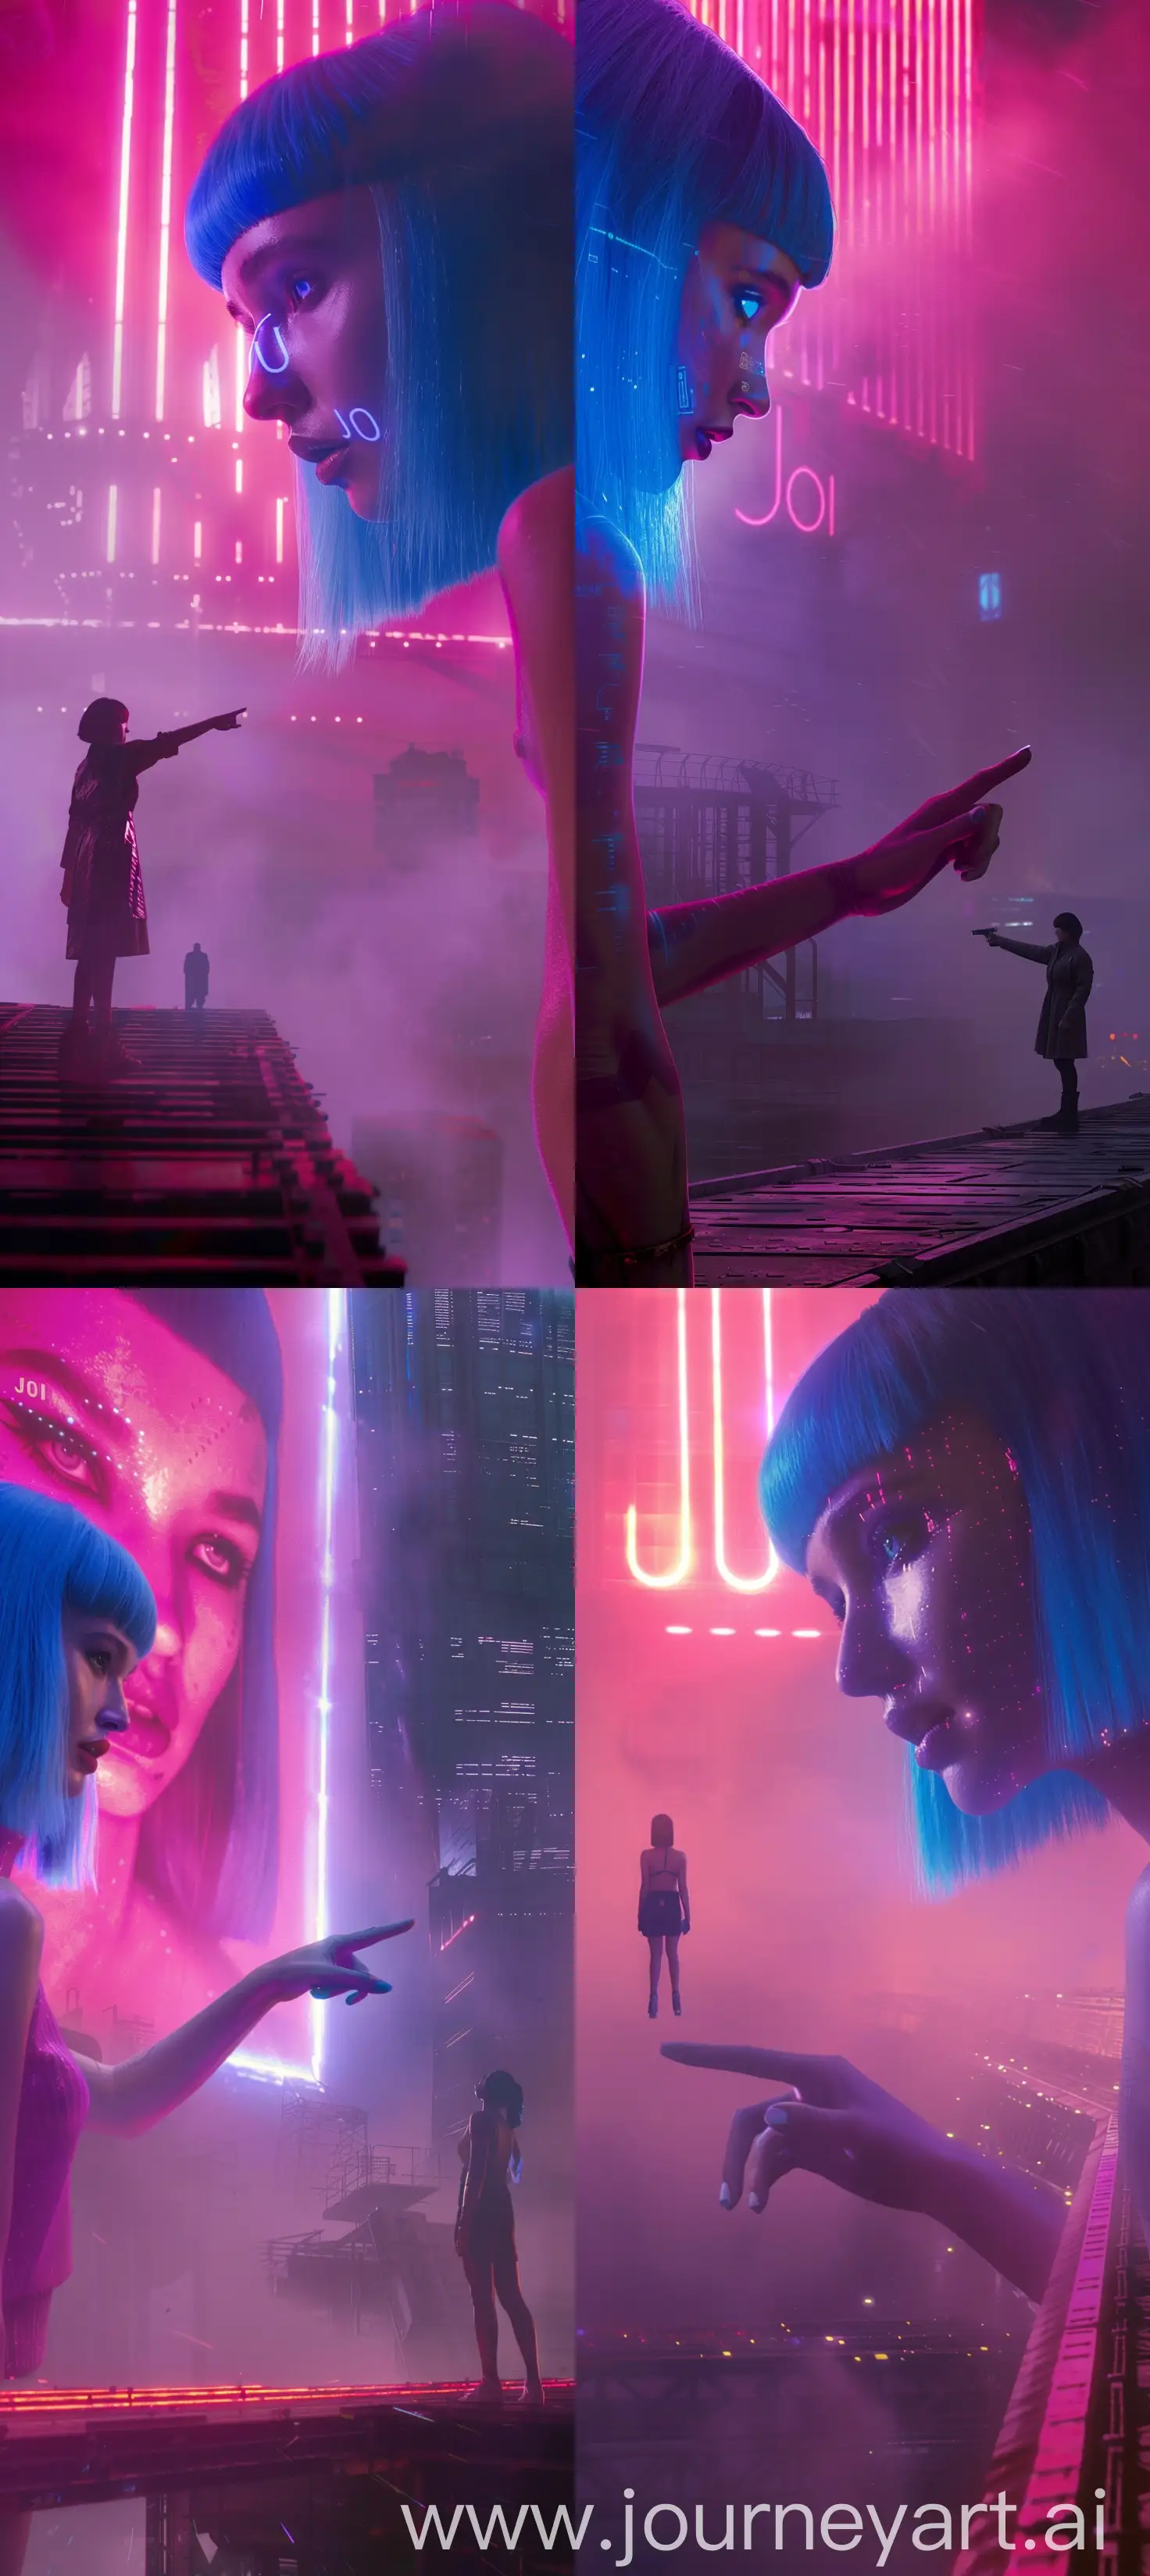 A futuristic, cyberpunk scene from Blade runner 2049 movie you look lonely scene with a giant holographic woman JOI  with blue hair pointing towards a solitary figure on a dark, misty platform. The neon lights and vibrant purples create an ethereal, surreal atmosphere. The background features a foggy, industrial cityscape, adding depth and mystery to the image. The hologram's detailed expression contrasts with the small, silhouetted figure, emphasizing scale and loneliness --cref https://i.postimg.cc/XYHL4NXk/d0da44db45e761a070253b5dccd1a012.jpg --cw 100 --ar 57:128 --v 6